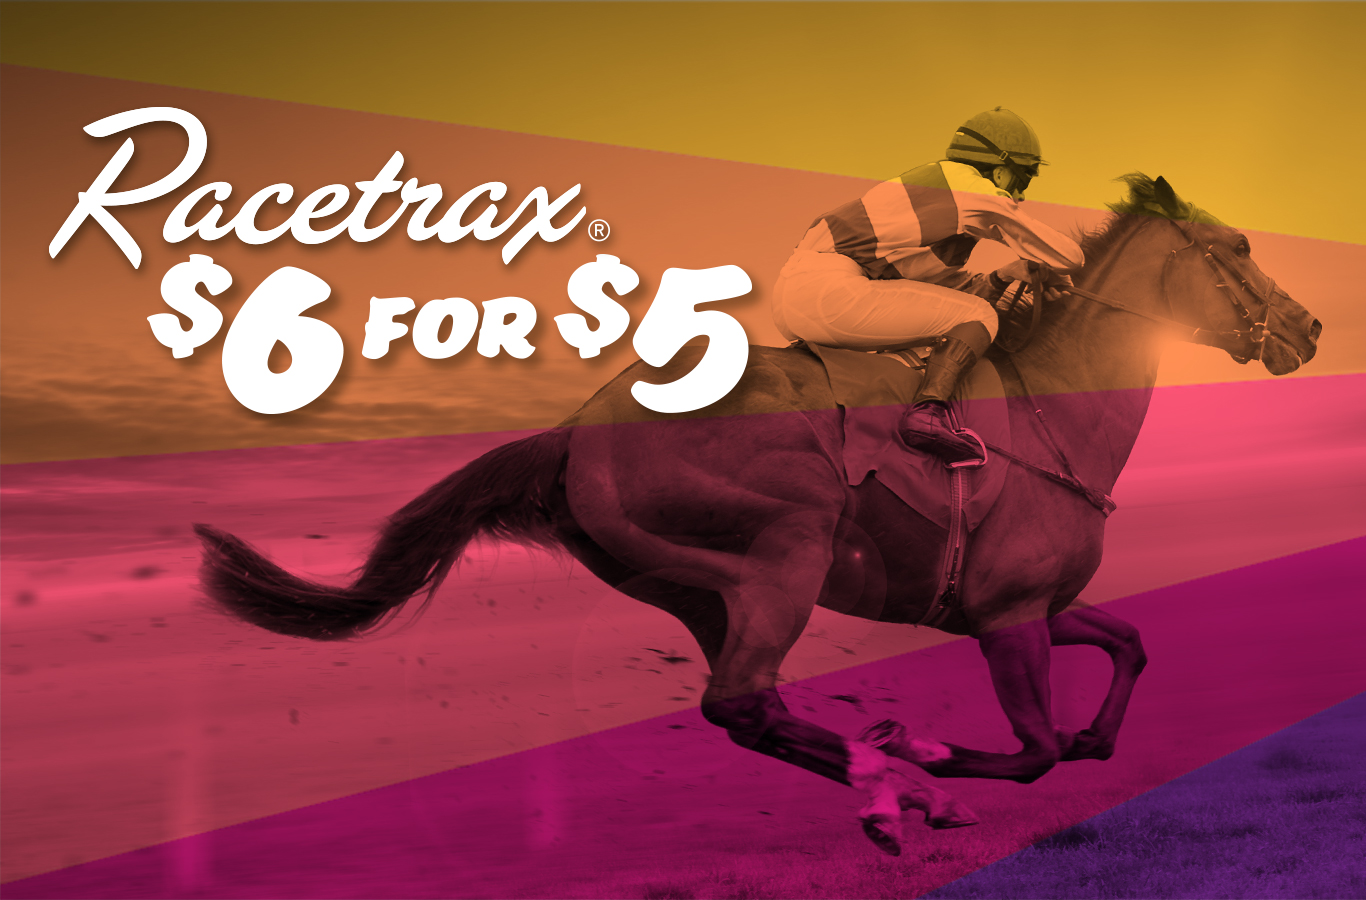 We're off to the races! ANY $6 Racetrax® purchase will receive a $1 discount!